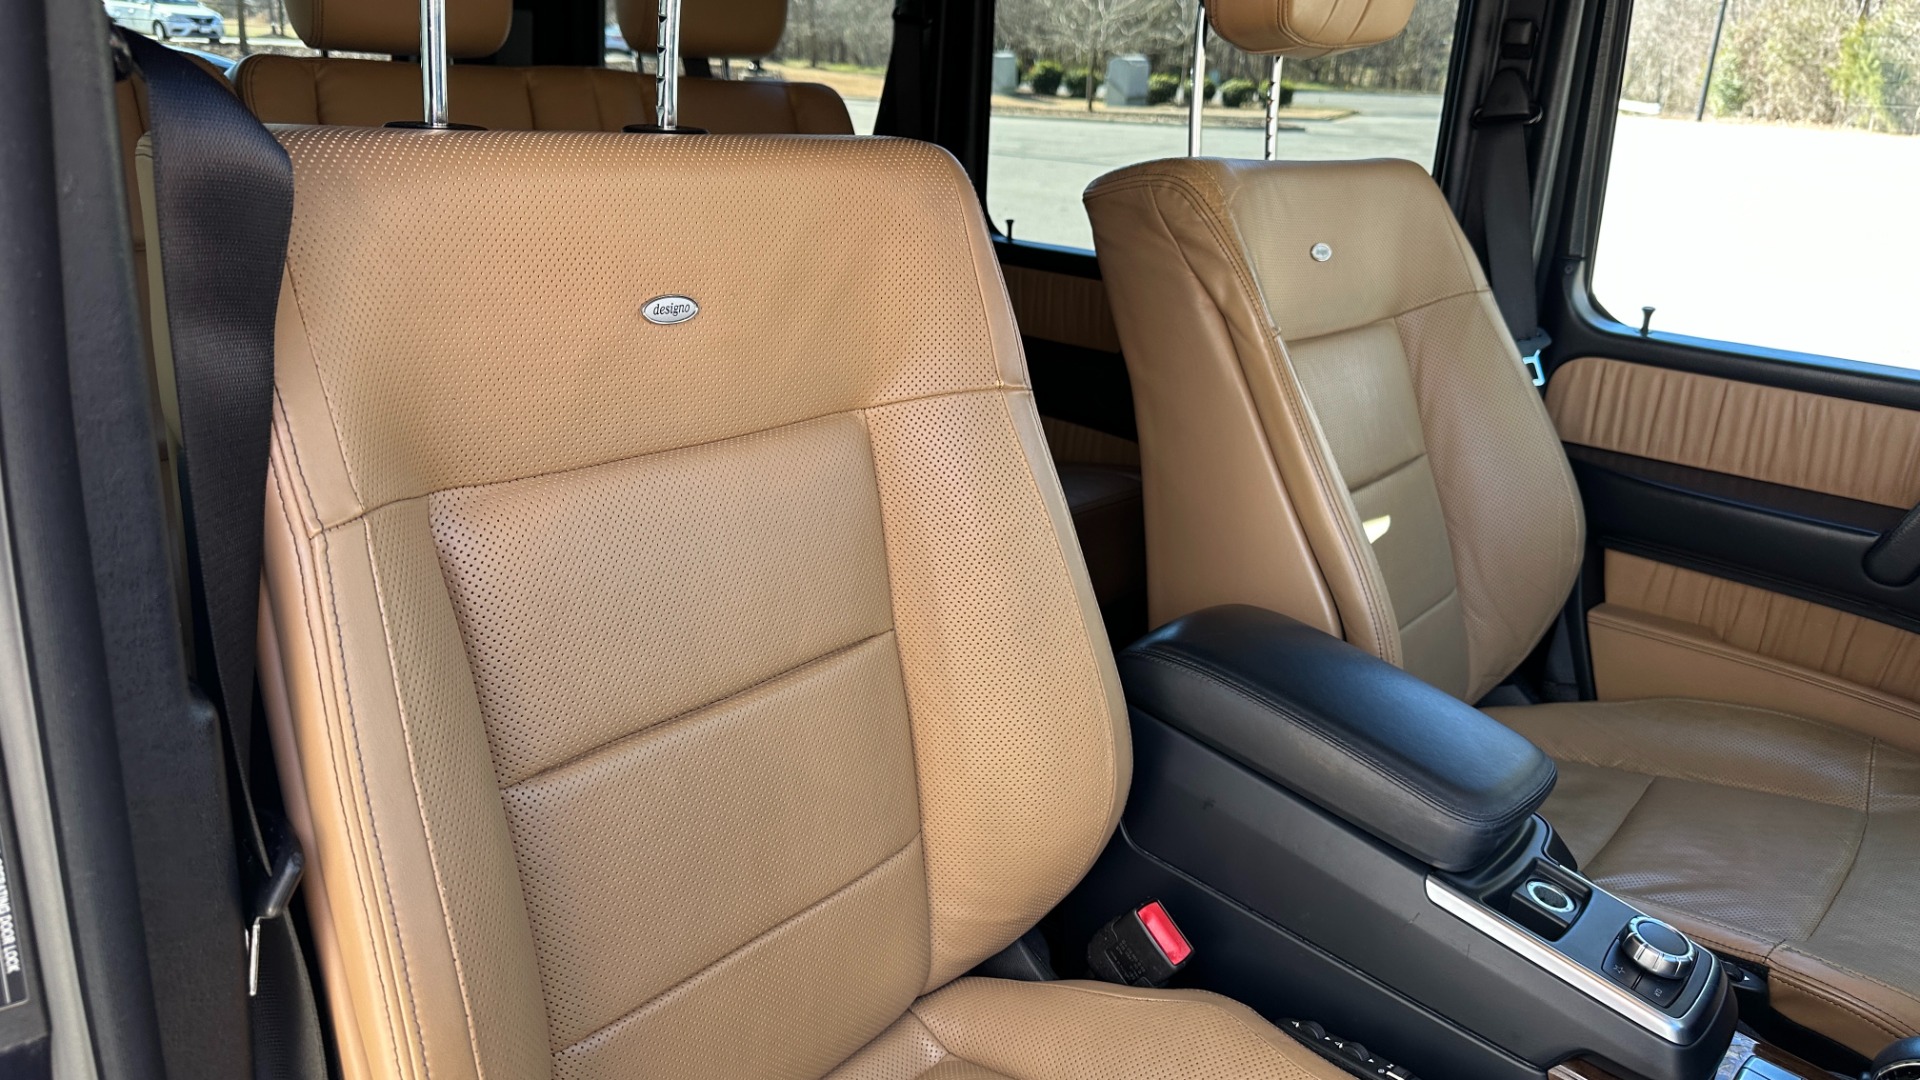 Used 2015 Mercedes-Benz G-Class G550 / DESIGNO NAPPA LEATHER / DESIGNO HEADLINER / HEATED STEERING / NAV /  for sale Sold at Formula Imports in Charlotte NC 28227 30